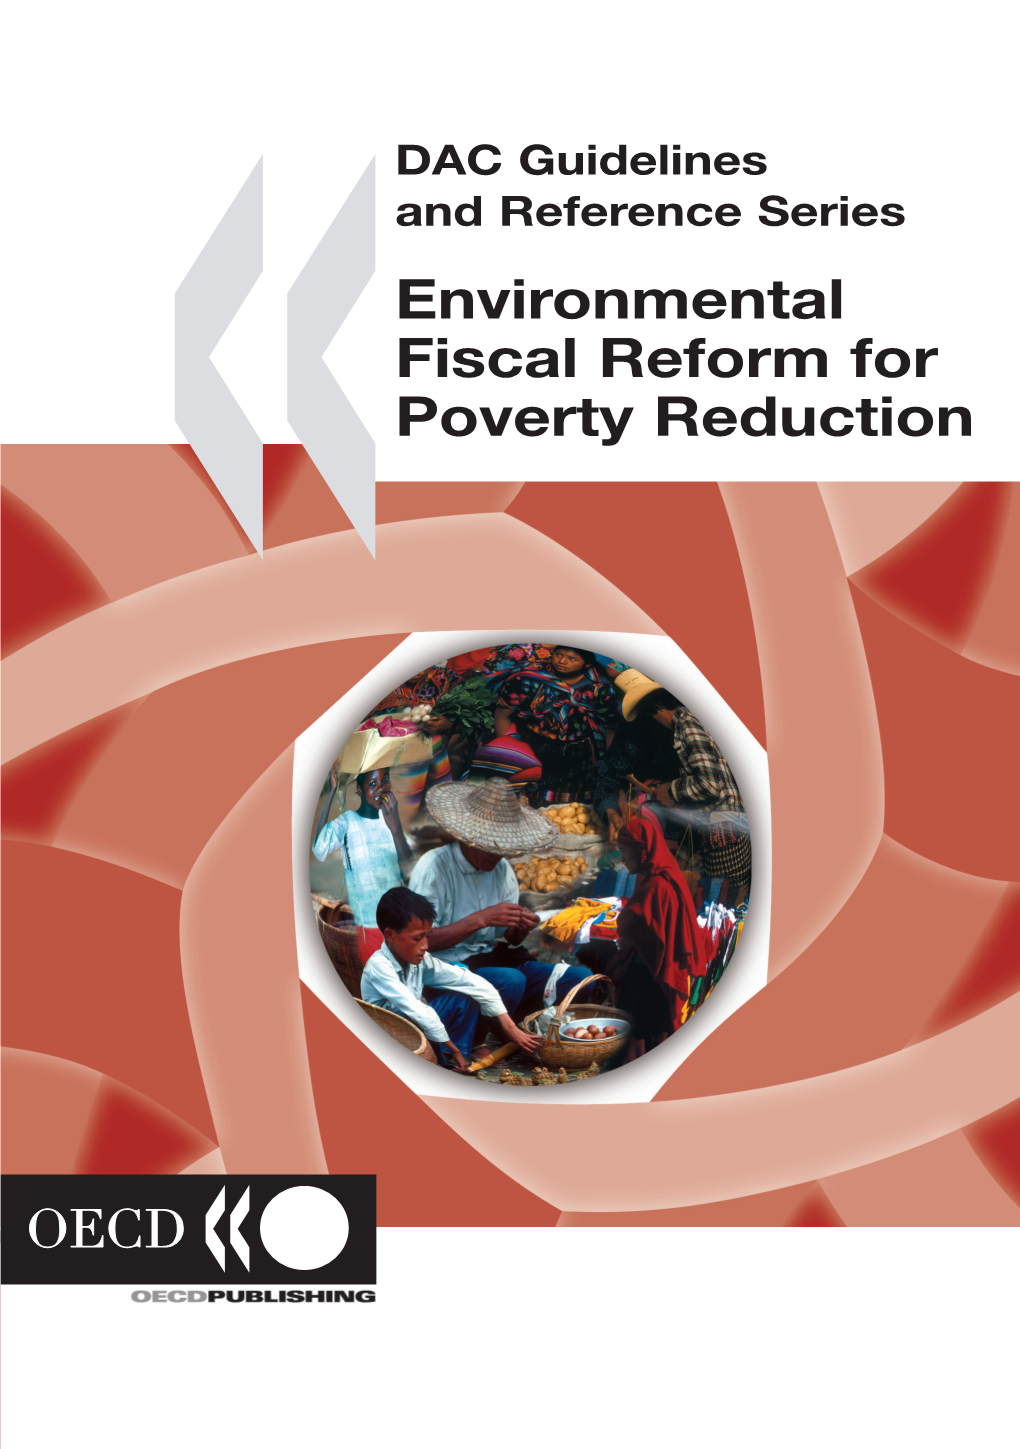 Environmental Fiscal Reform for Poverty Reduction DAC Guidelines This DAC Reference Paper Outlines Key Issues Faced When Designing Environmental Fiscal Reform (EFR)